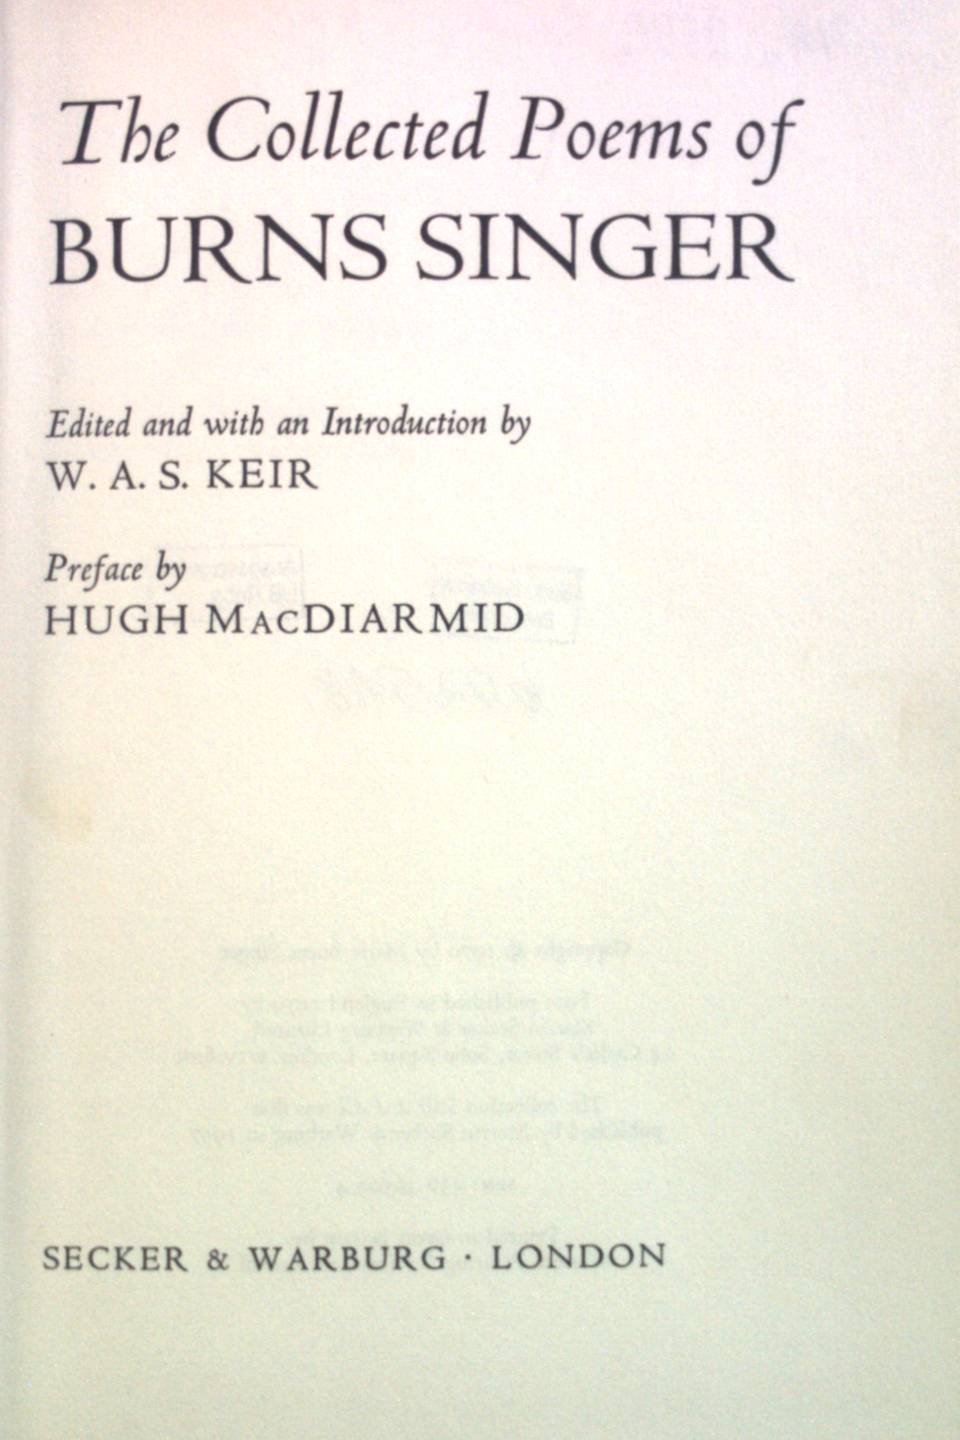 The Collected Poems of Burns Singer. - Keir, W.A.S.